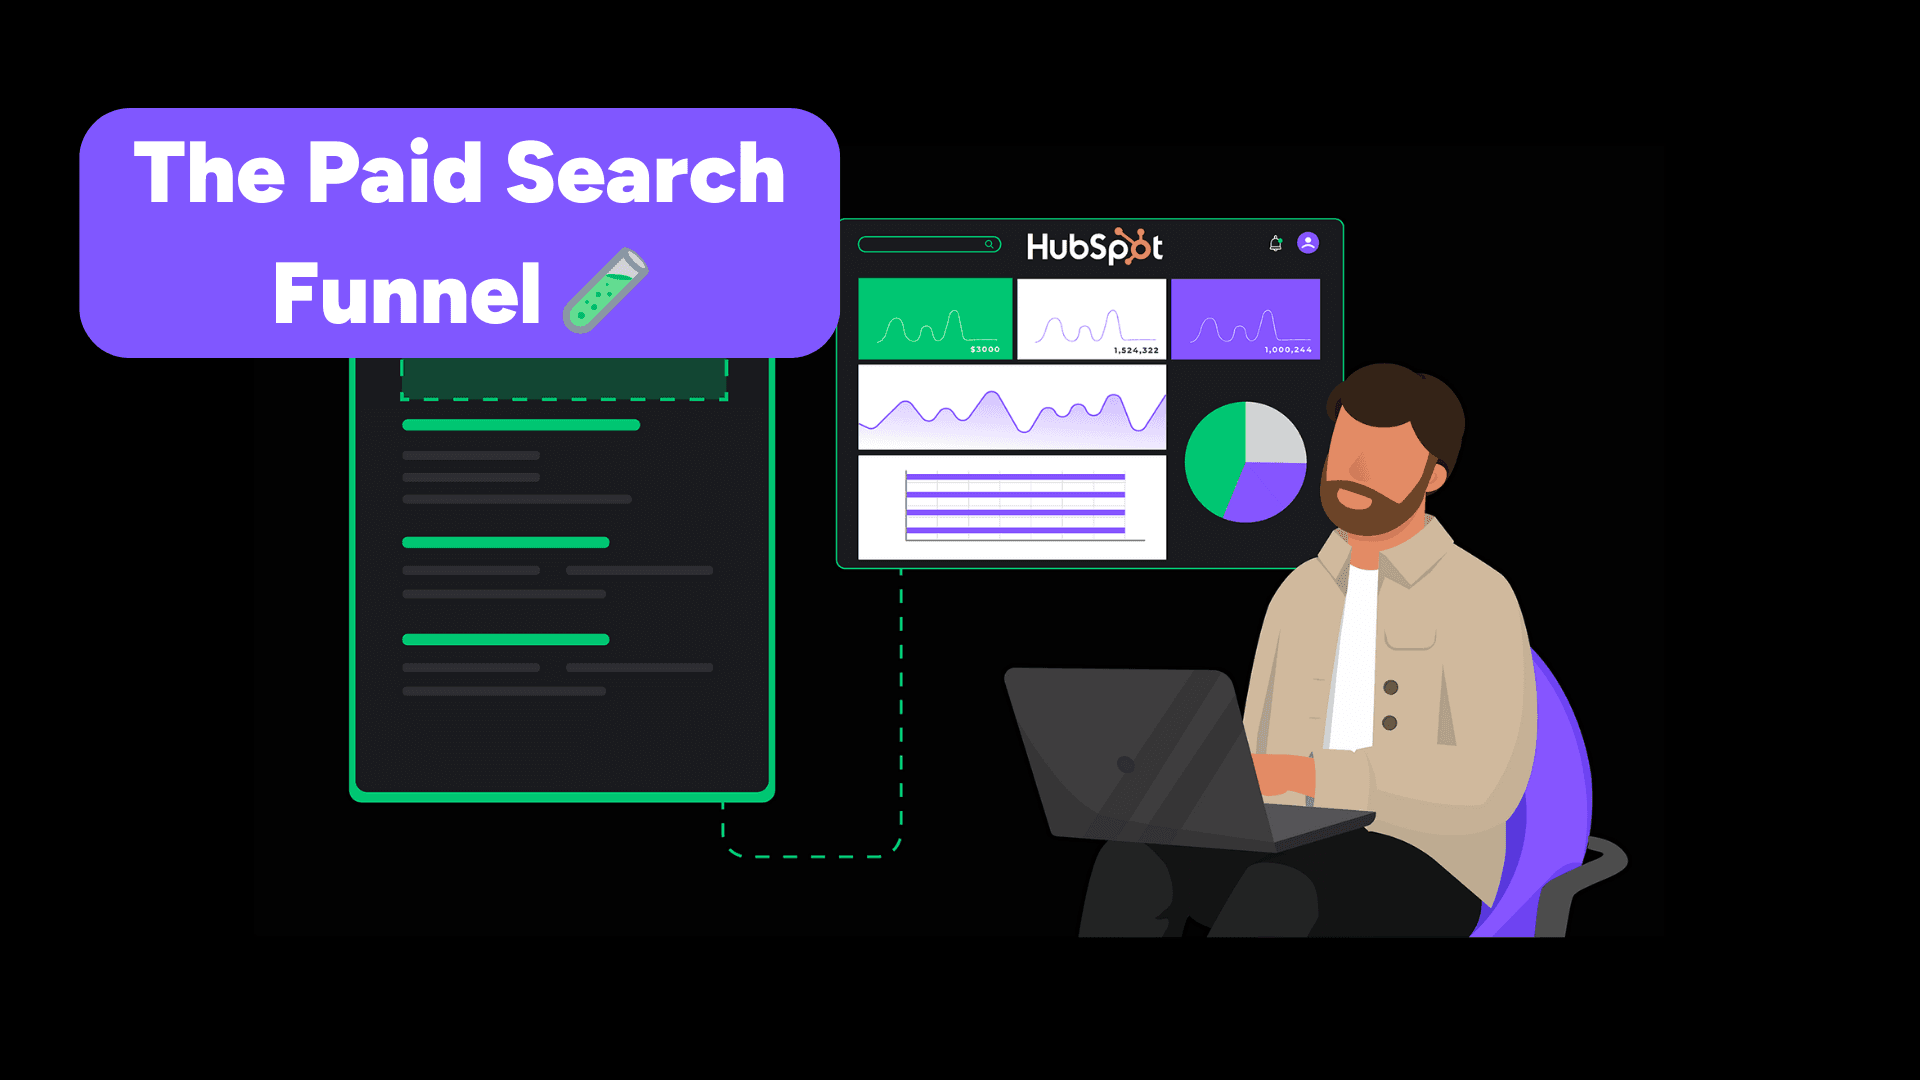 The Paid Search Funnel